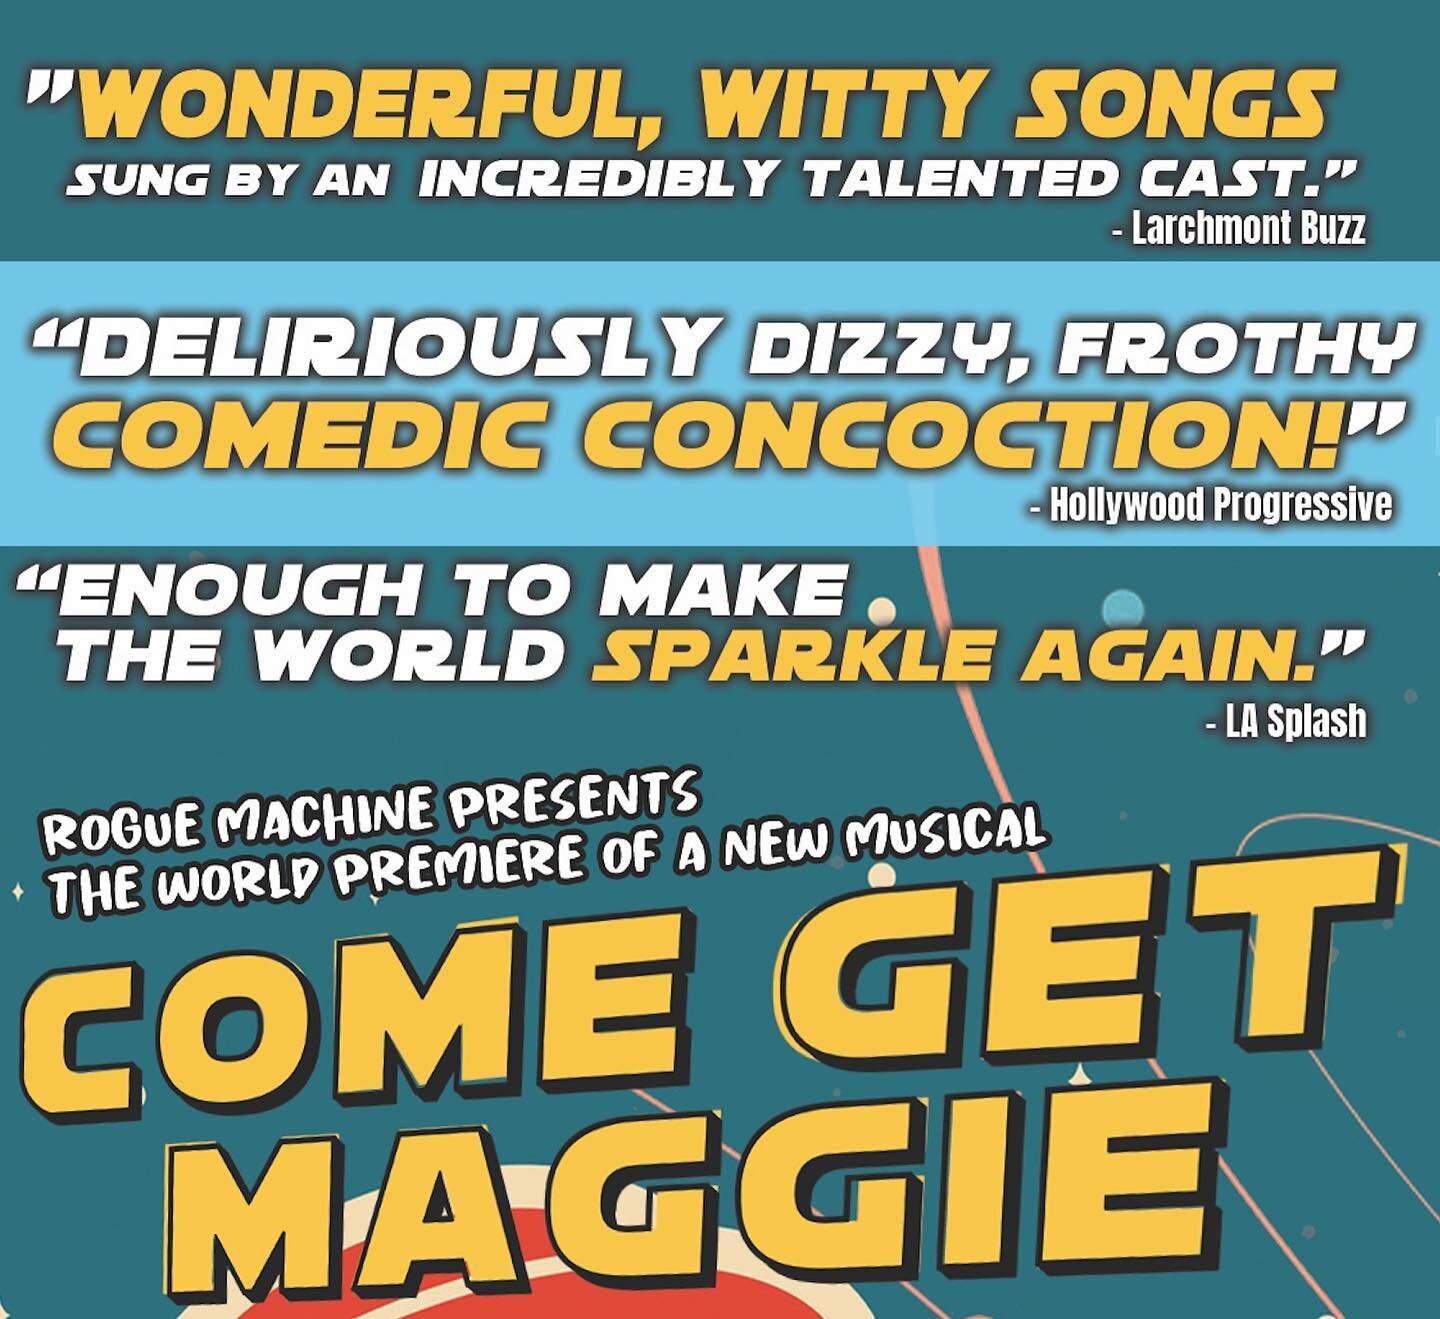 We are beyond thankful for all the amazing reviews coming in for COME GET Come Get Maggie!

#ComeGetMaggieMusical #ComeGetMaggie #musicaltheatre #musical #theatre #musicals #theater #dance #musicaltheater #singer #actor #acting #performingarts #the